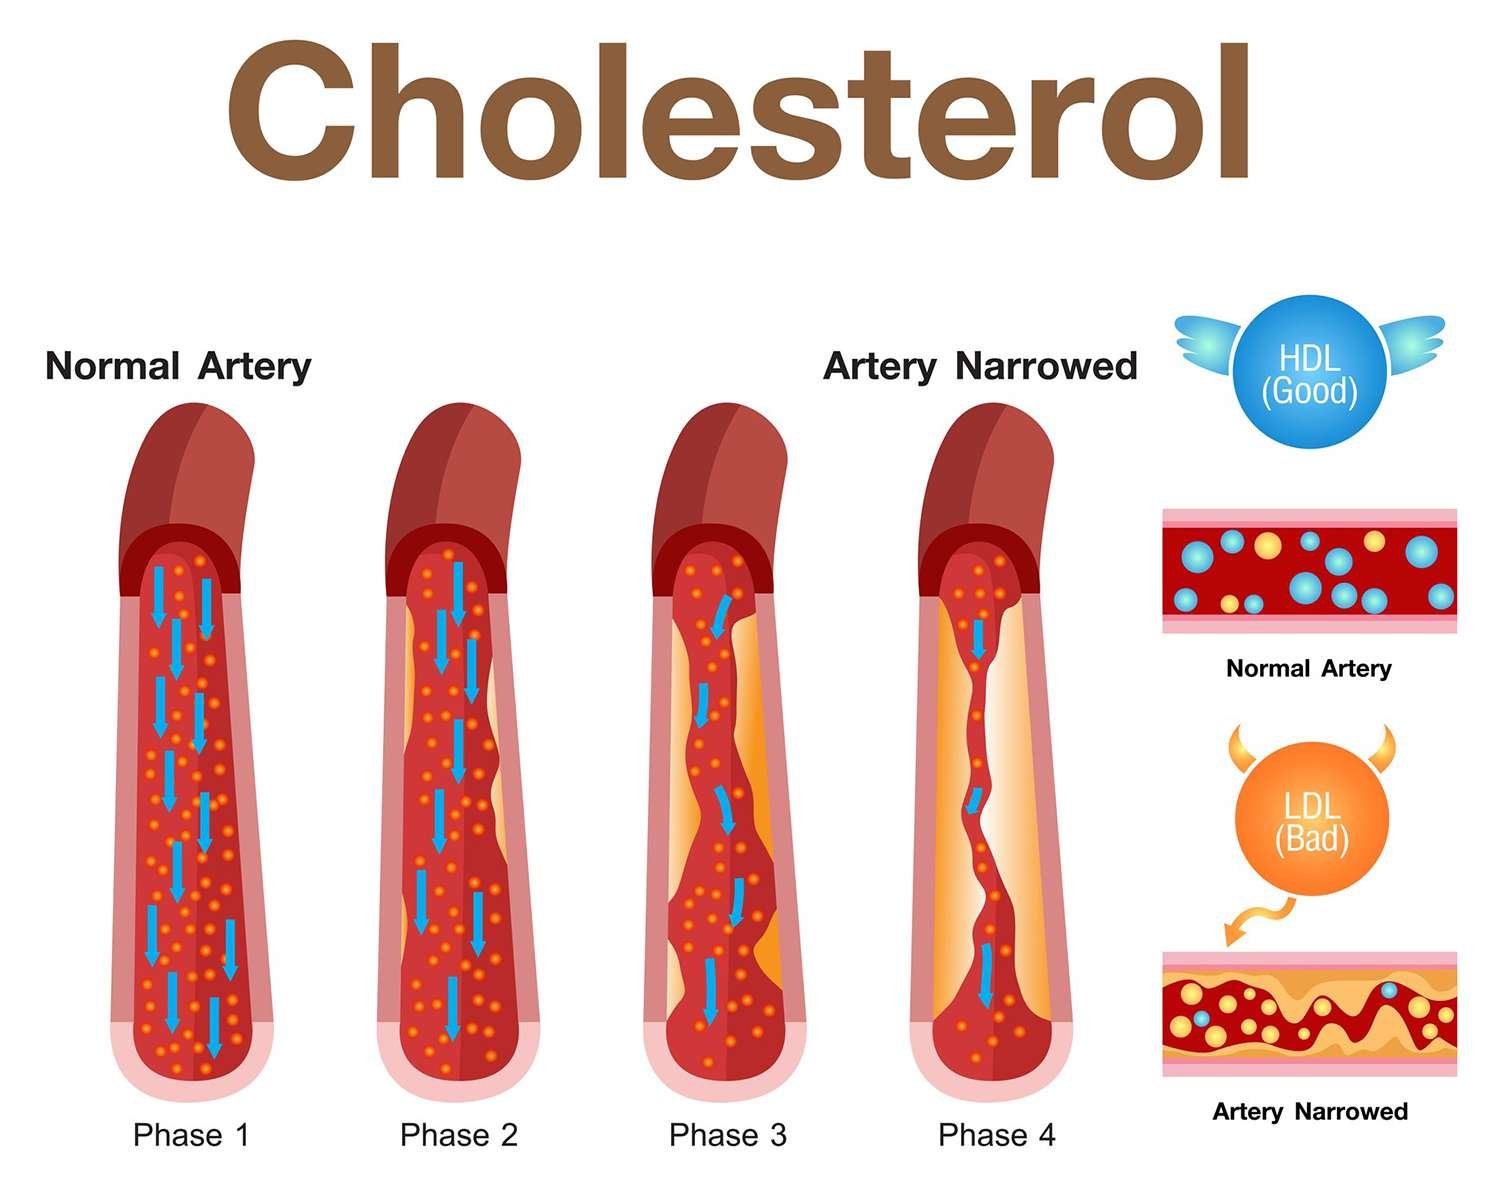 Medicare Agent News: Which is good cholesterol? LDL or HDL?